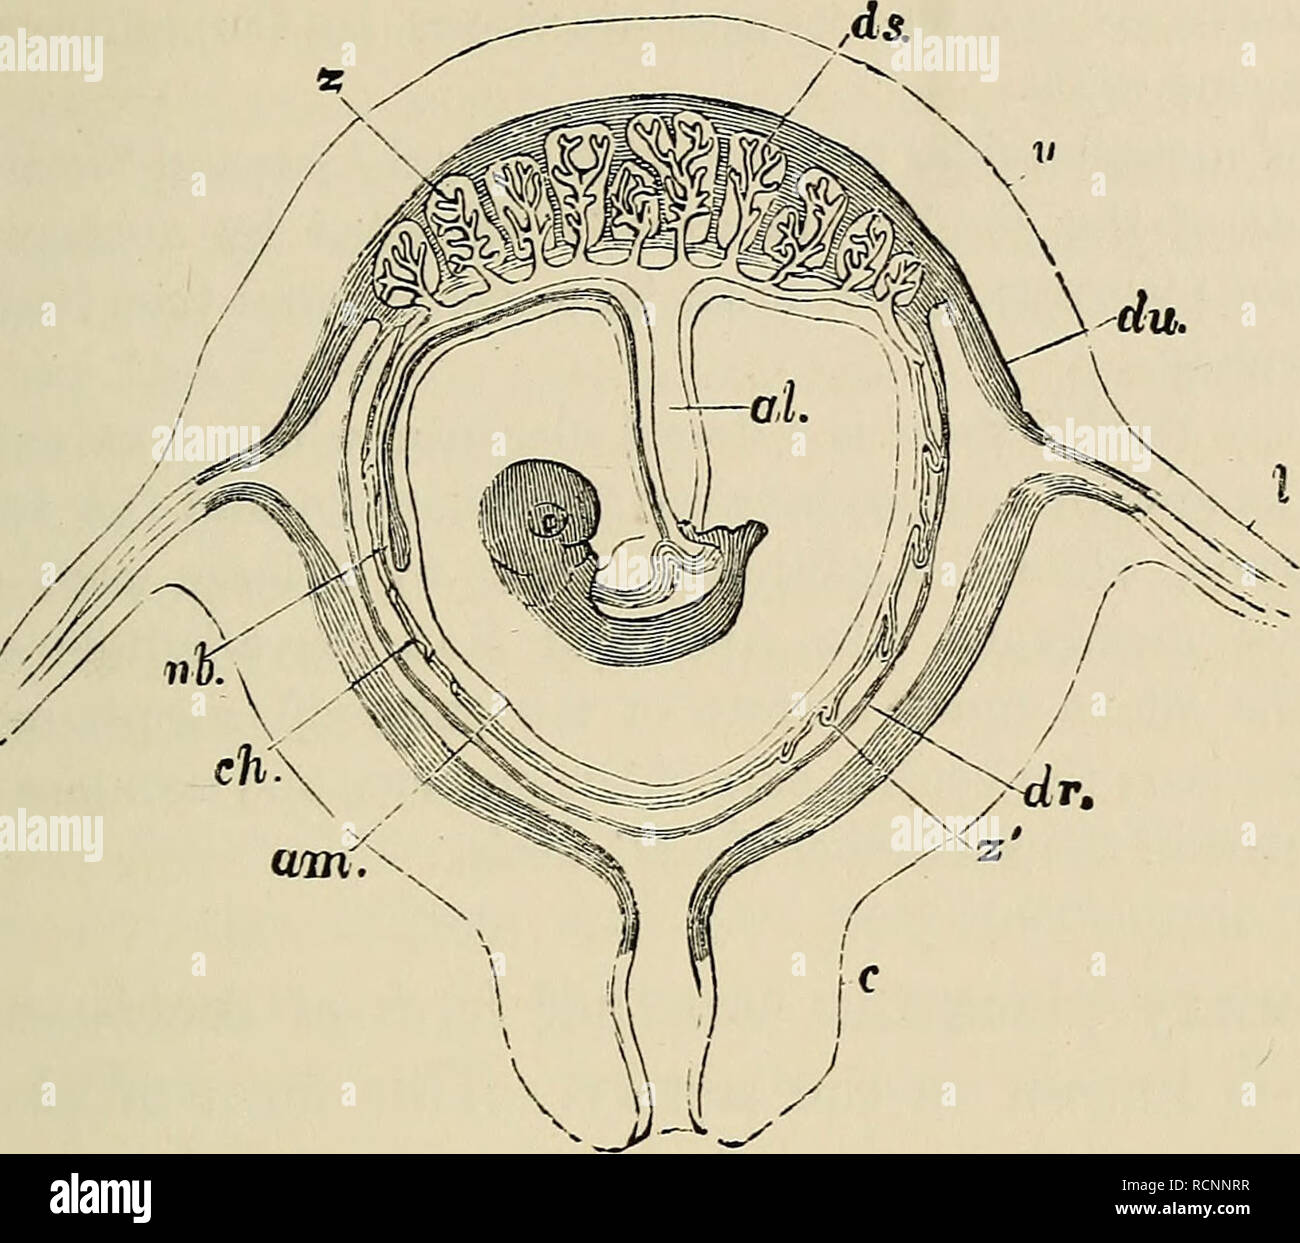 . The elements of embryology. Embryology; Embryology. XL] THE CHORION. Fig. 117. 357. Diagrammatic Section of Pregnant Human Uterus with CONTAINED FcETUS. (From Huxley after Longet.) &lt;il. allantoic stalk; nh. umbilical vesicle; am. amnion; ch. cho- rion ; ds. decidua serotina; du. decidua vera; dr. decidua reflexa; I. fallopian tube ; c. cervix uteri; u. uterus; z. foetal villi of true placenta; /. villi of non-placental part of chorion. The placenta has a somewhat discoidal form, with a slightly convex uterine surface and a concave embryonic surface. At its edge it is continuous both with  Stock Photo